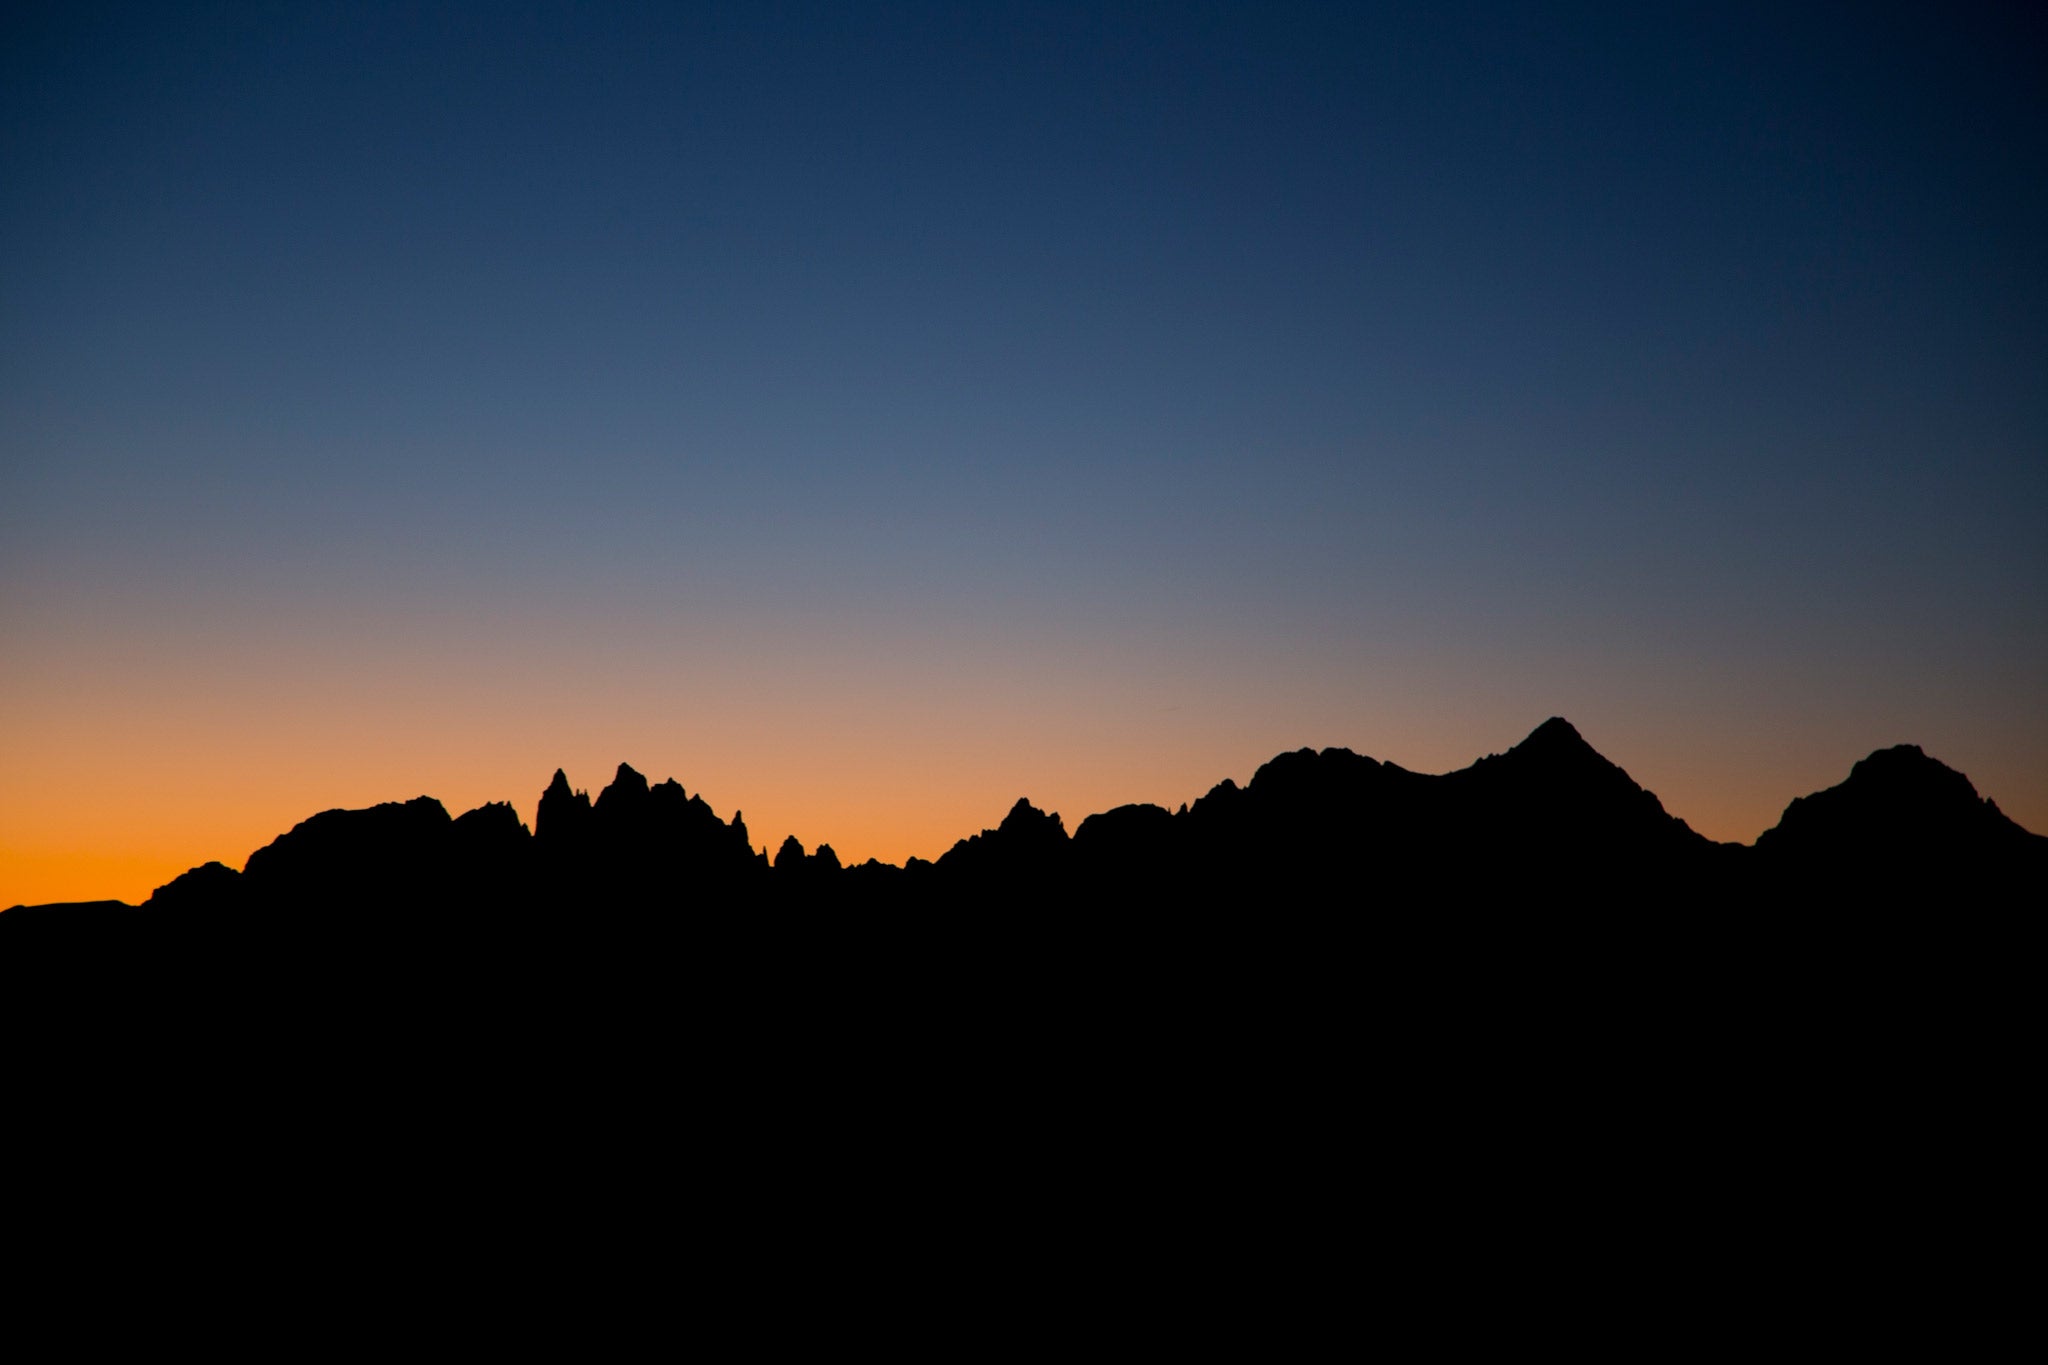 sunset silhouettes the Mammoth Lakes skyline - the Minarets, Ritter, and Banner